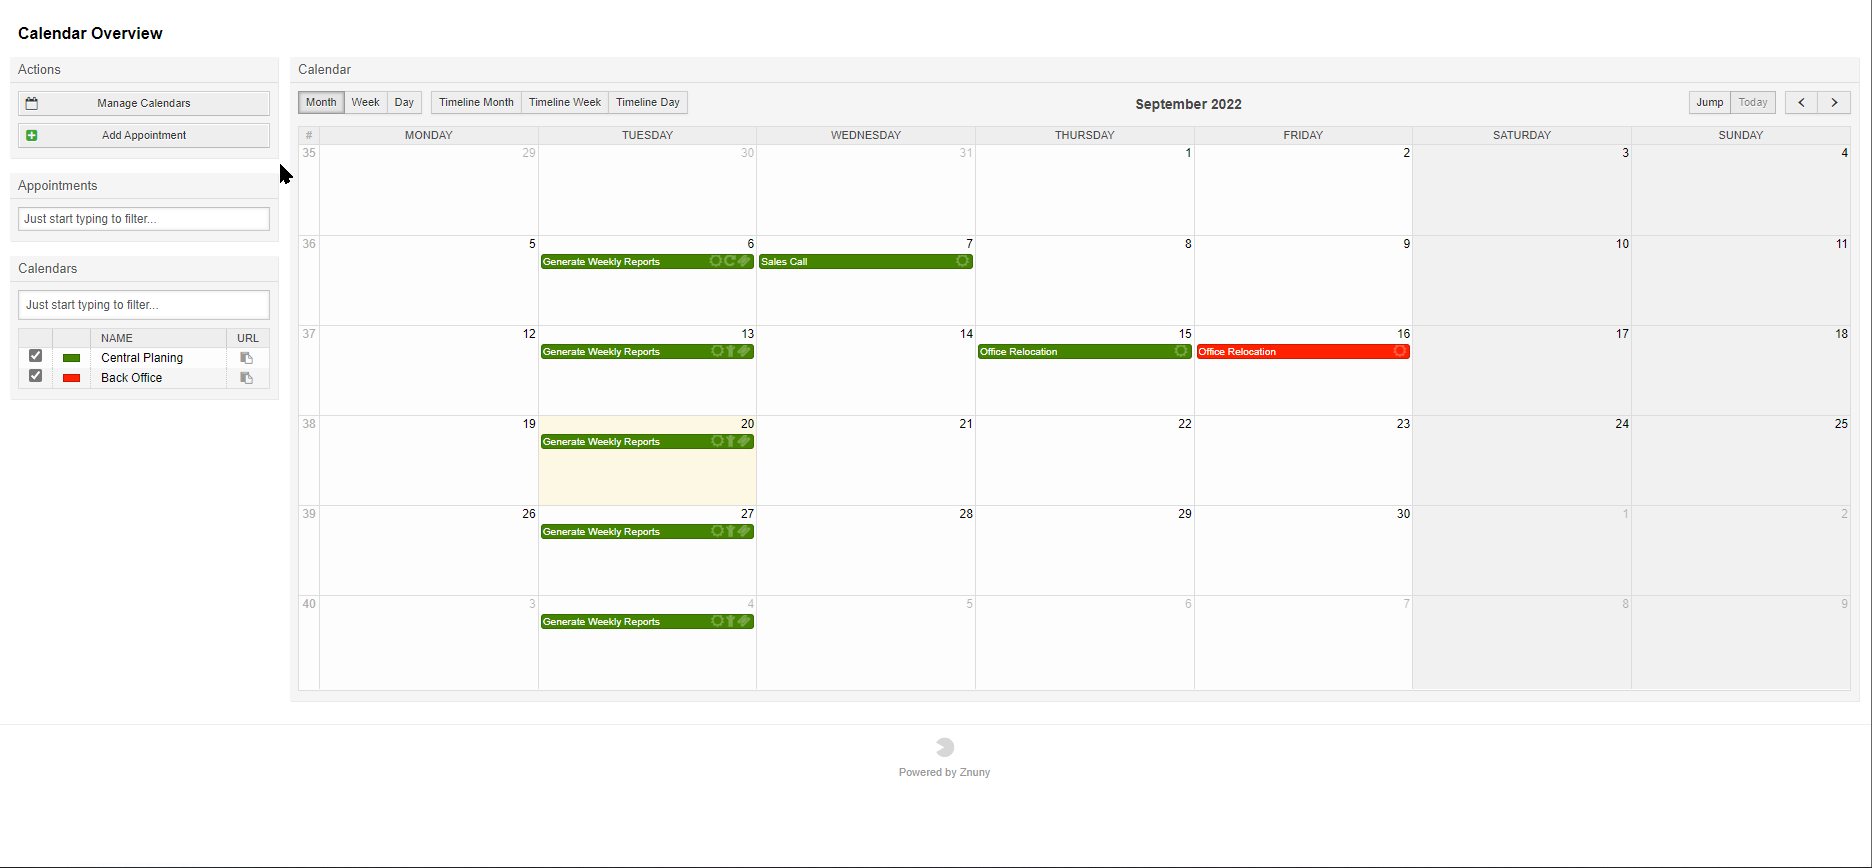 Image of Calendar Overview